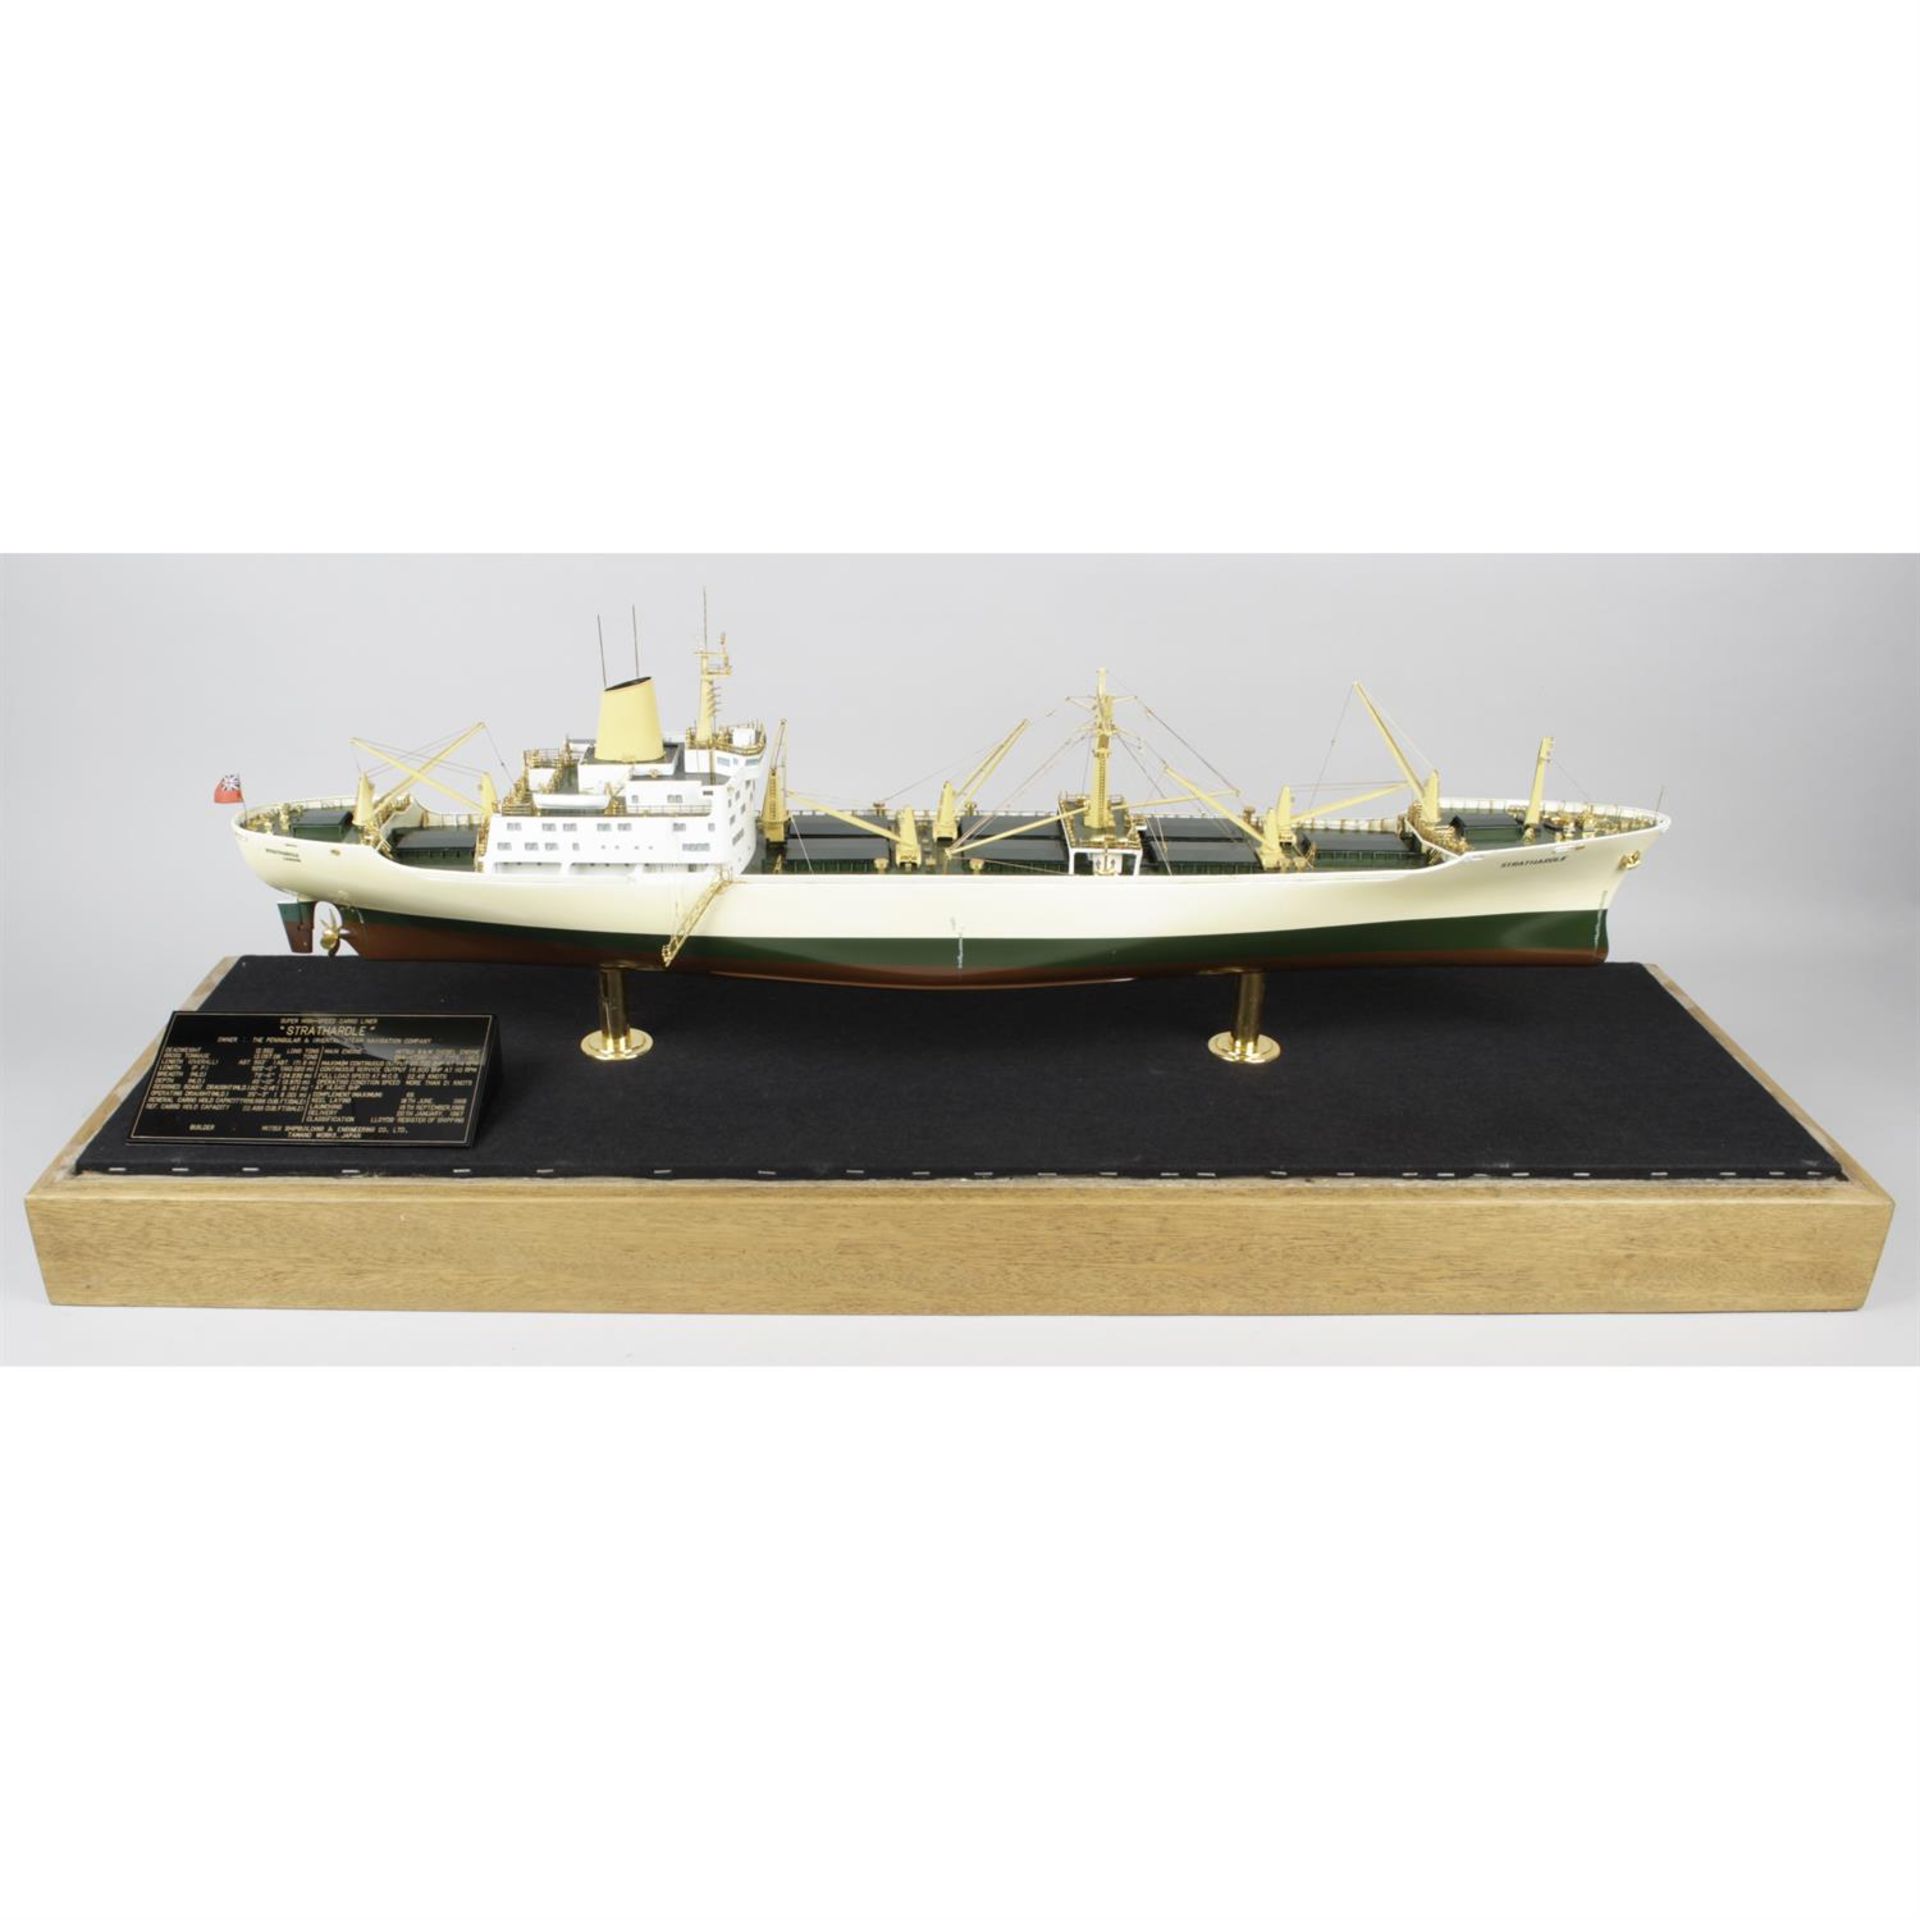 A fine boardroom or ship builders model of the Super High Speed Cargo Liner “Strathardle” of The